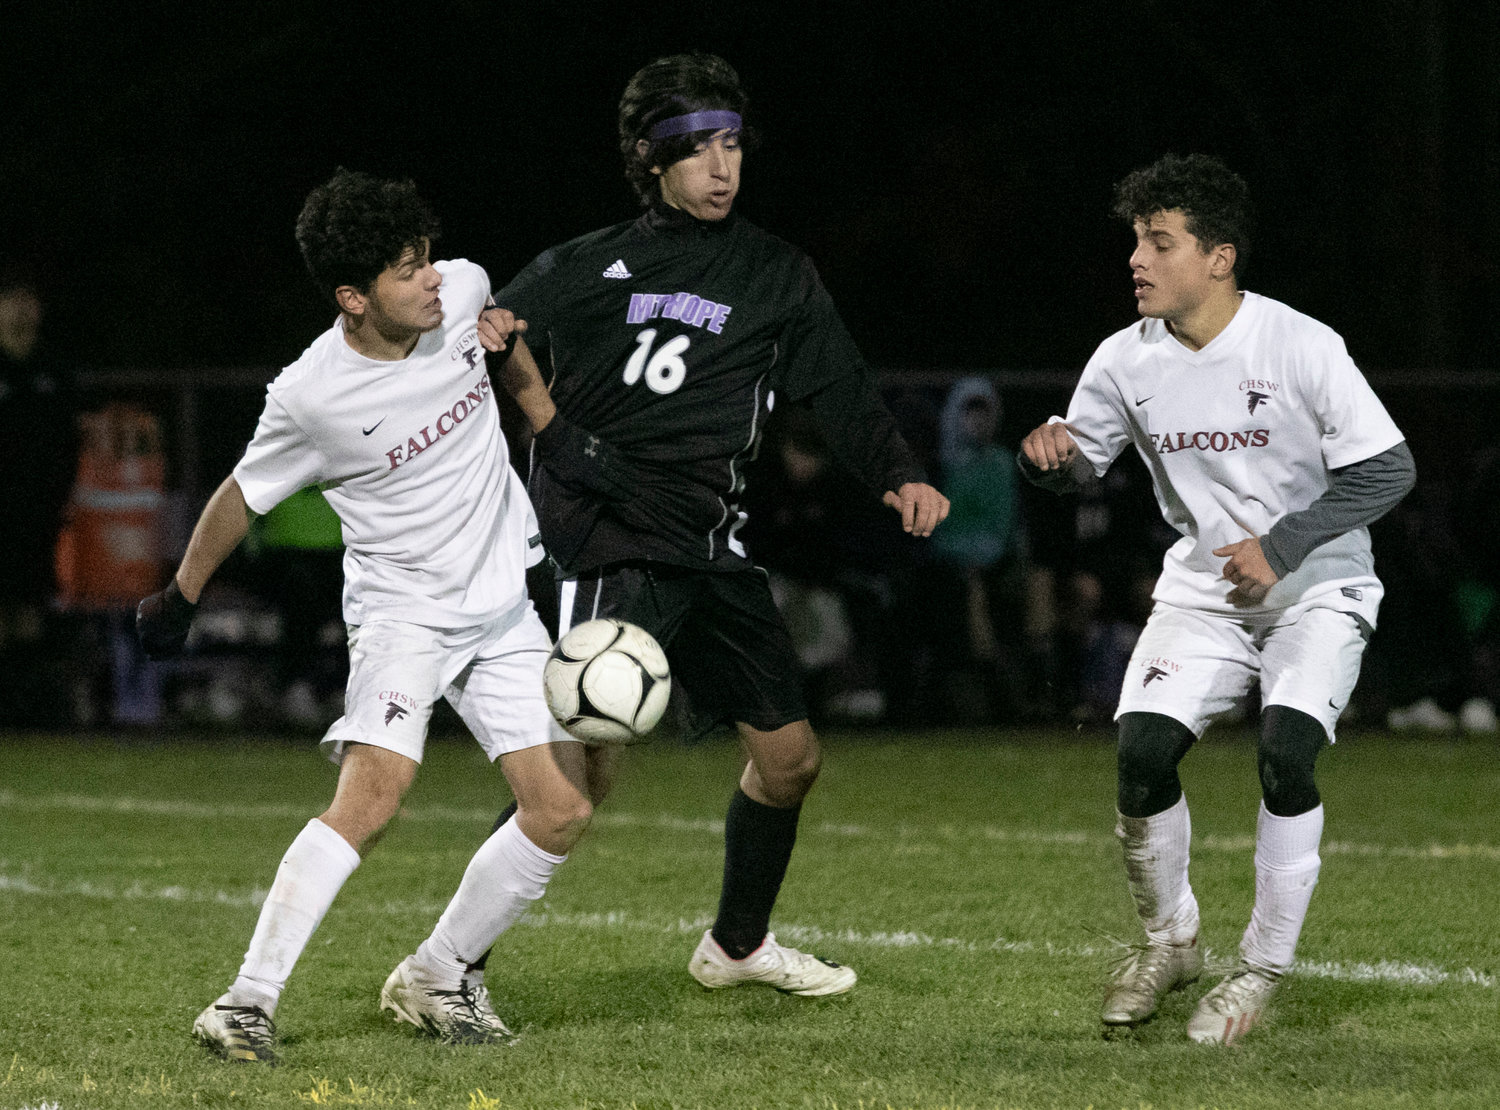 Defender Phil Berrettp (middle) vies for the ball at midfield.